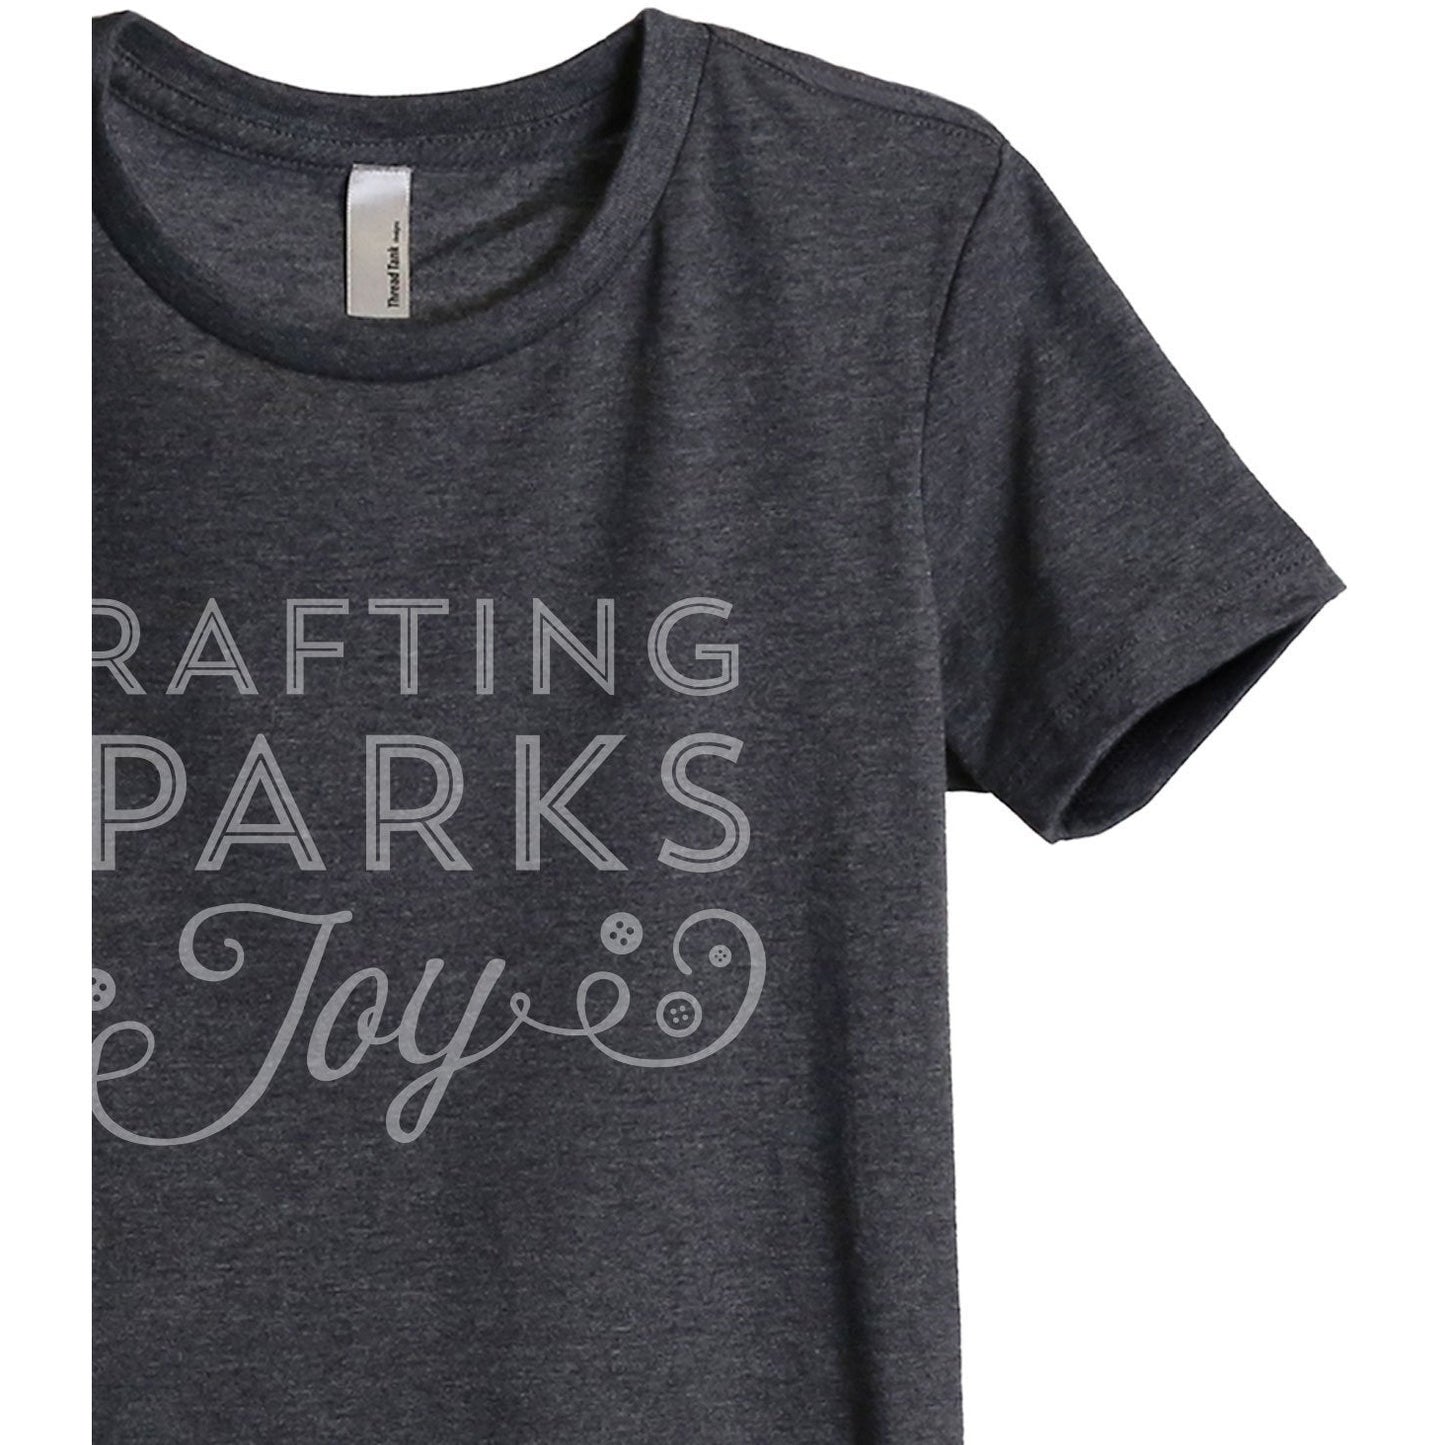 Crafting Sparks Joy Women's Relaxed Crewneck T-Shirt Top Tee Charcoal Grey Zoom Details